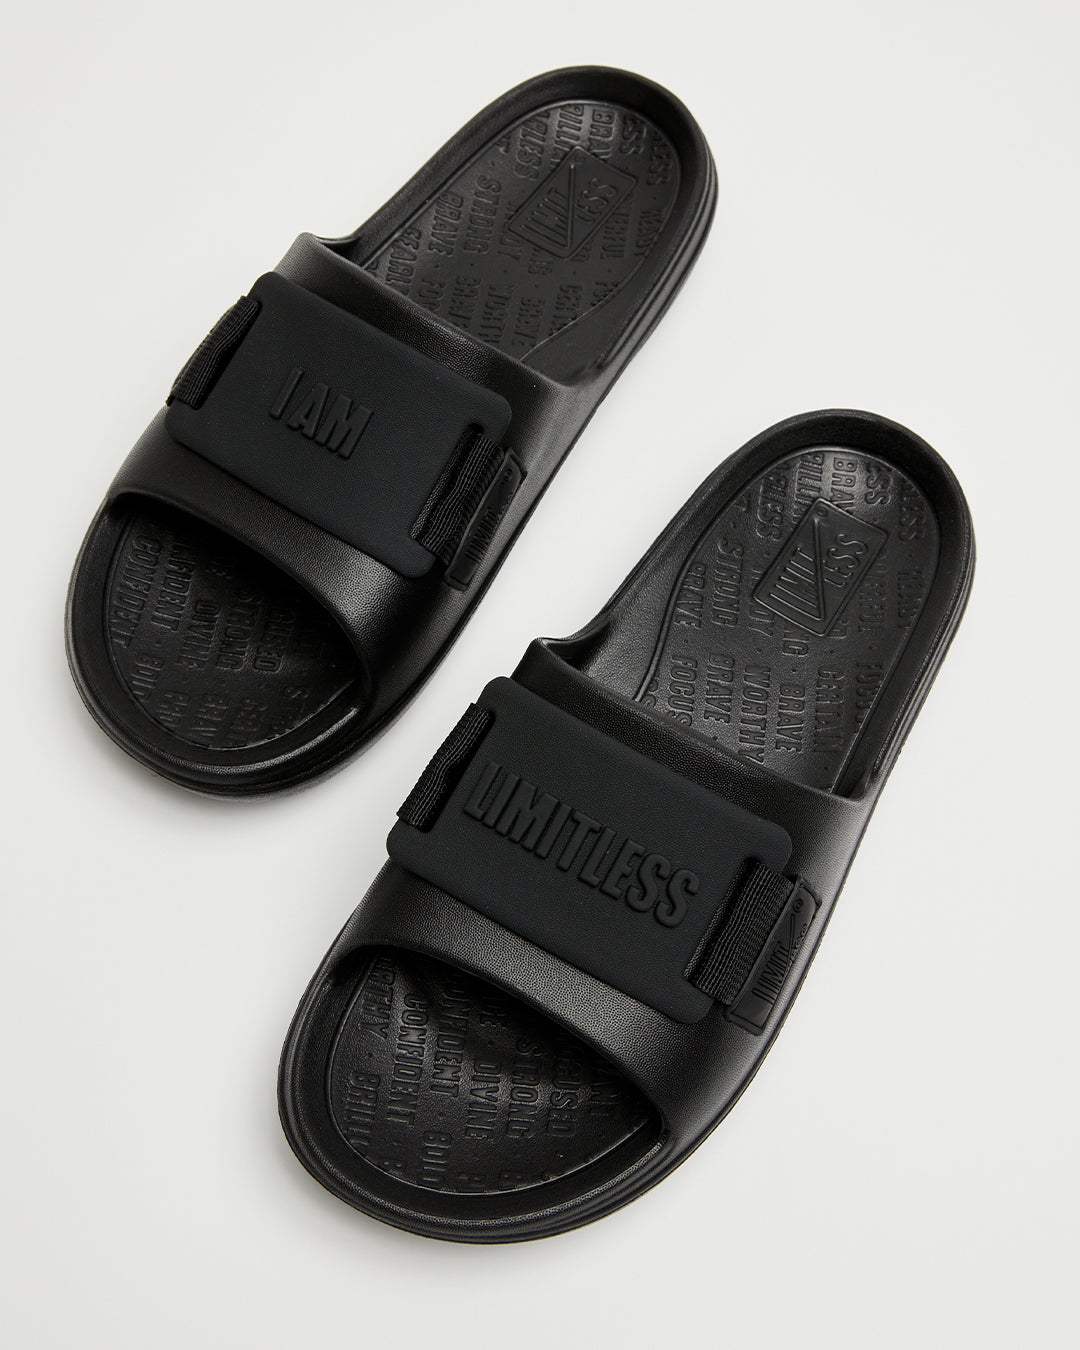 LIMITLESS SLIDES™ WITH ESSENTIAL TIBAH™ QUAD - MANATEE HIGH SCHOOL EDITION